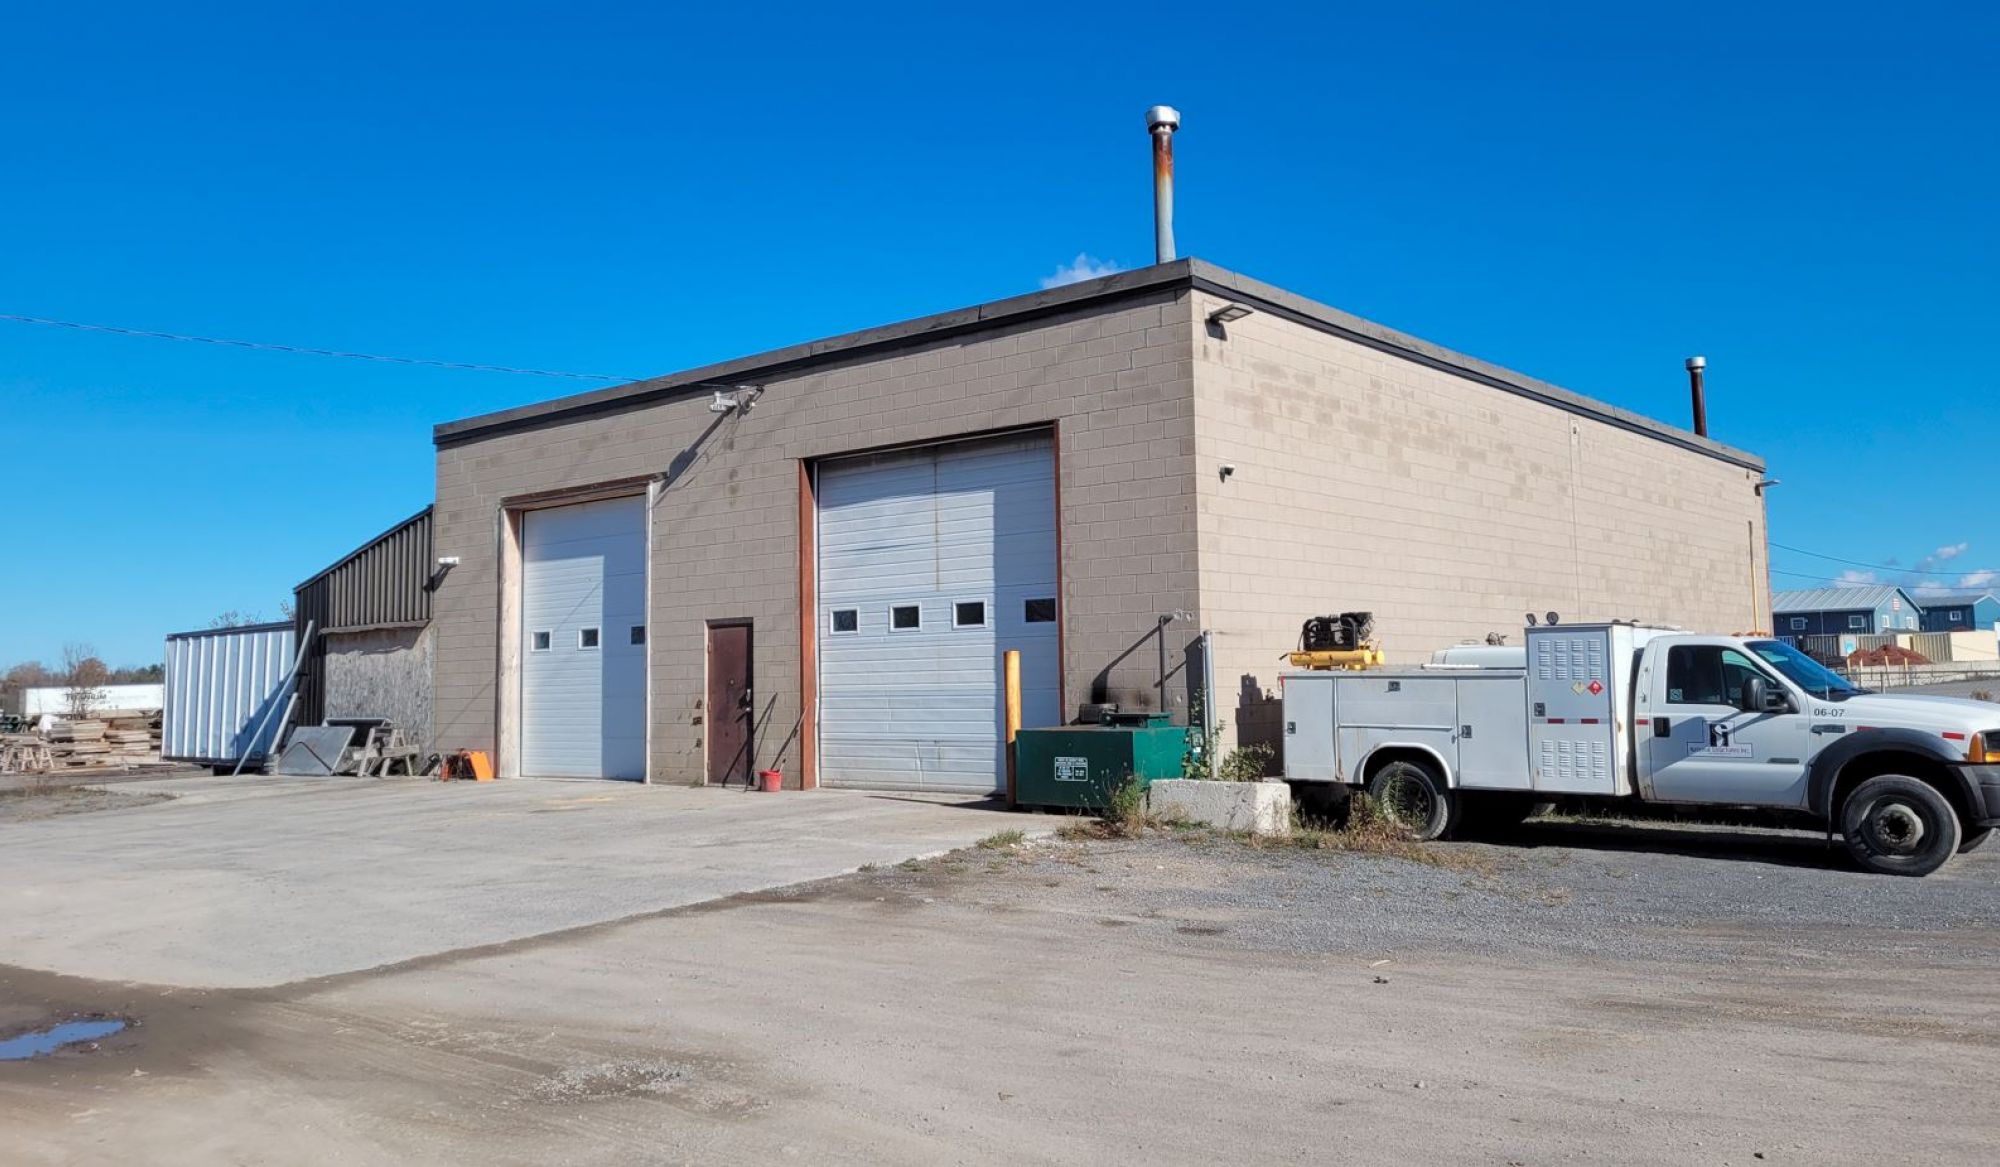 Industrial property for sale 